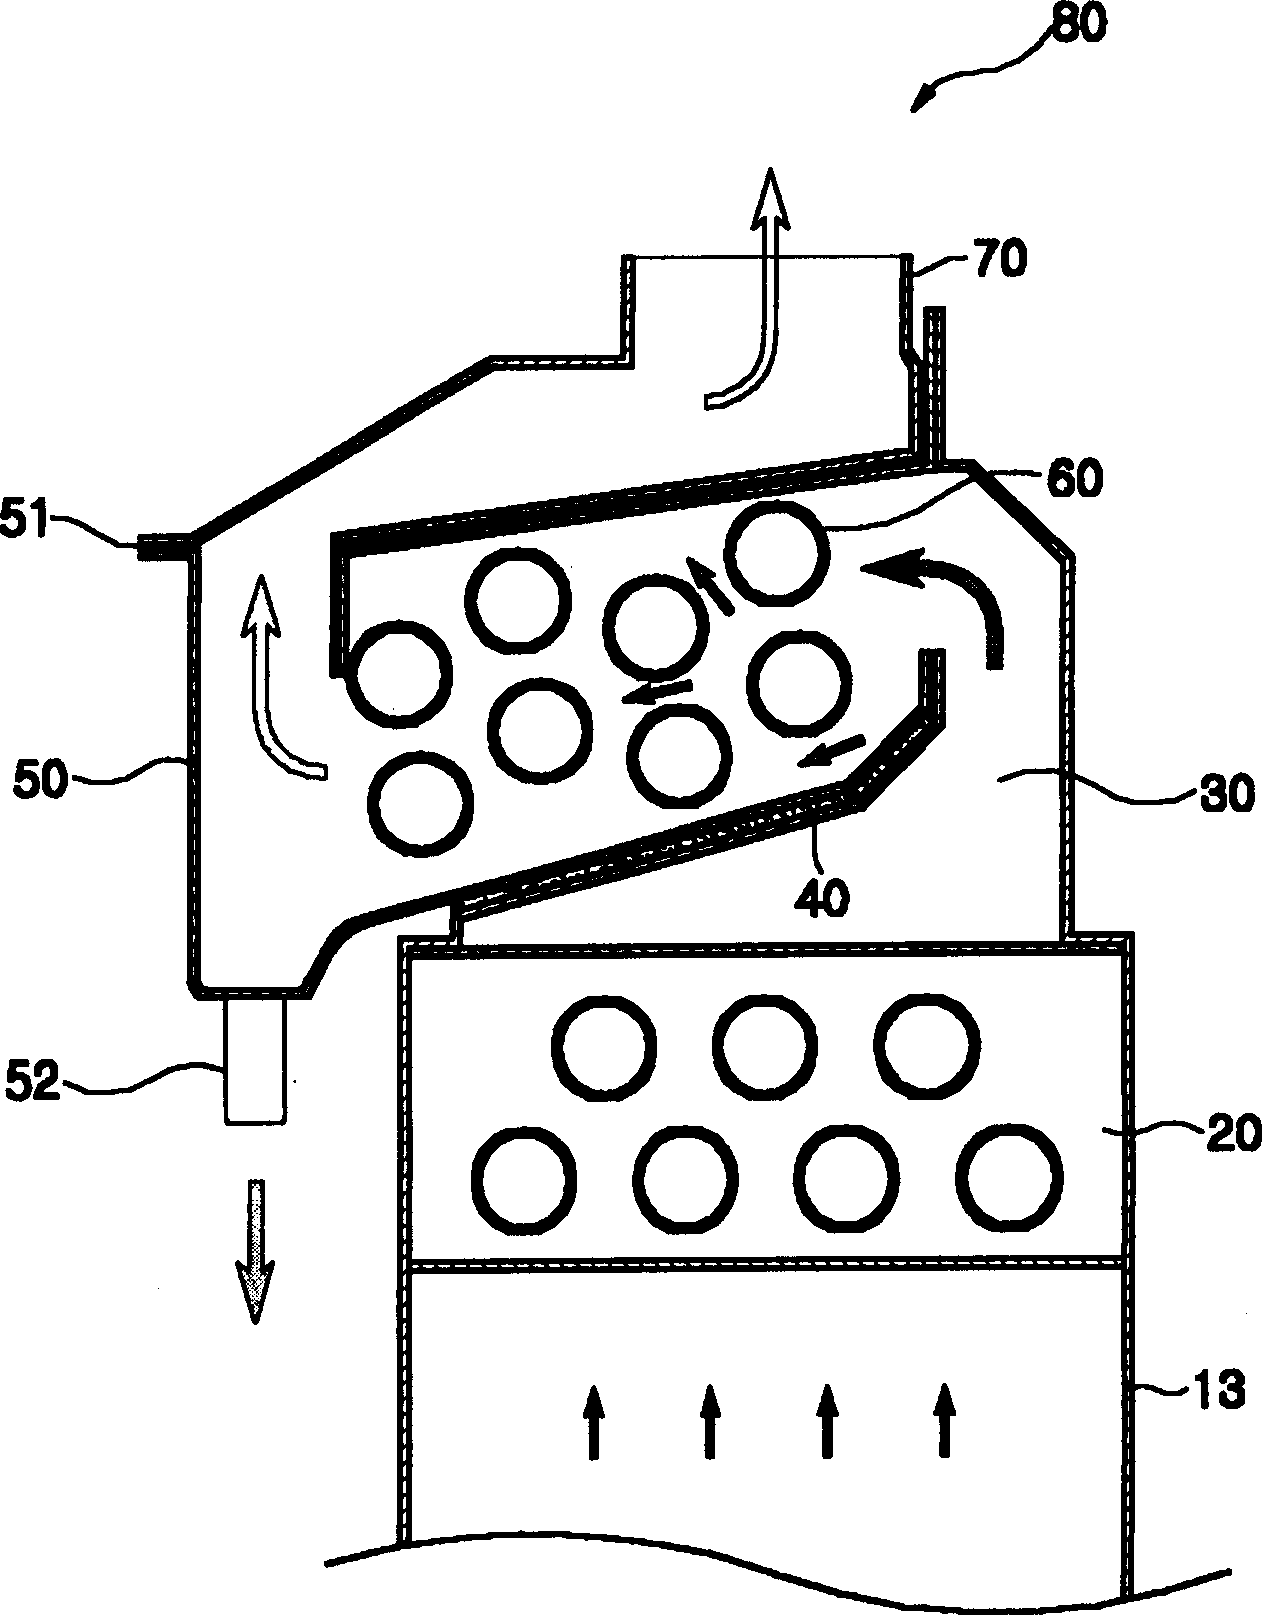 Latent heat absorbing apparatus for gas boiler